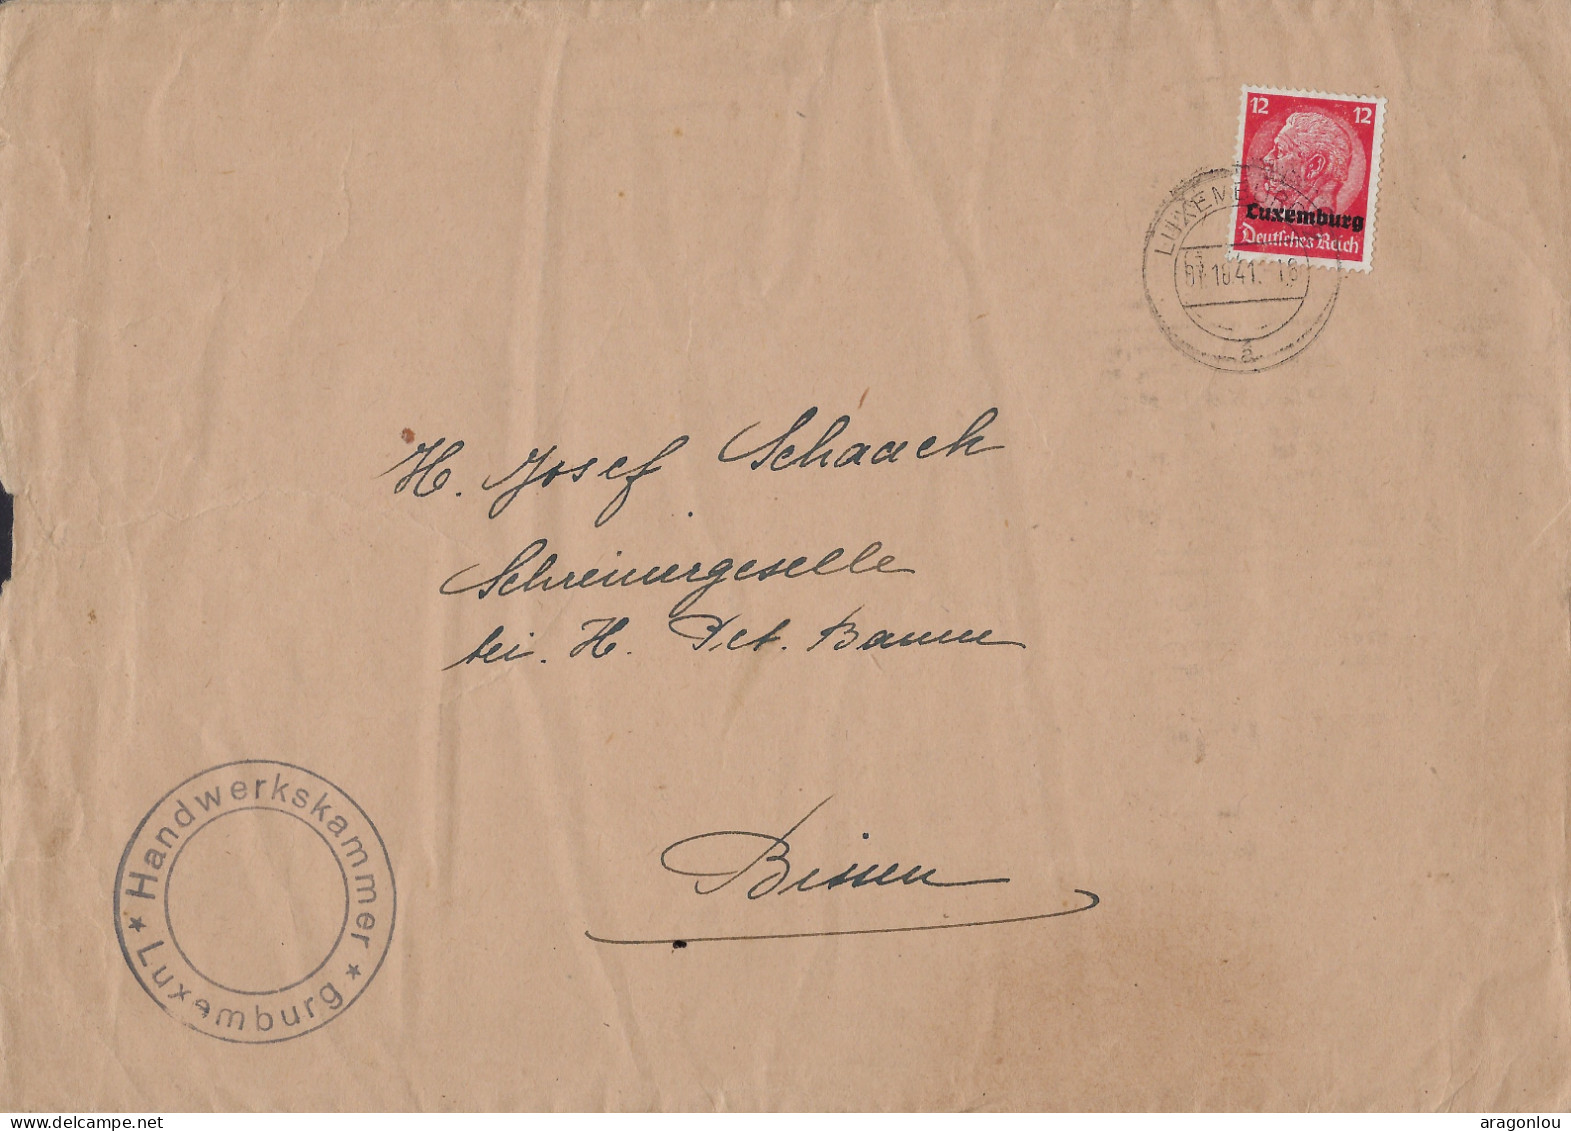 Luxembourg - Luxemburg -   Lettre  Occupation   1941 - 1940-1944 German Occupation